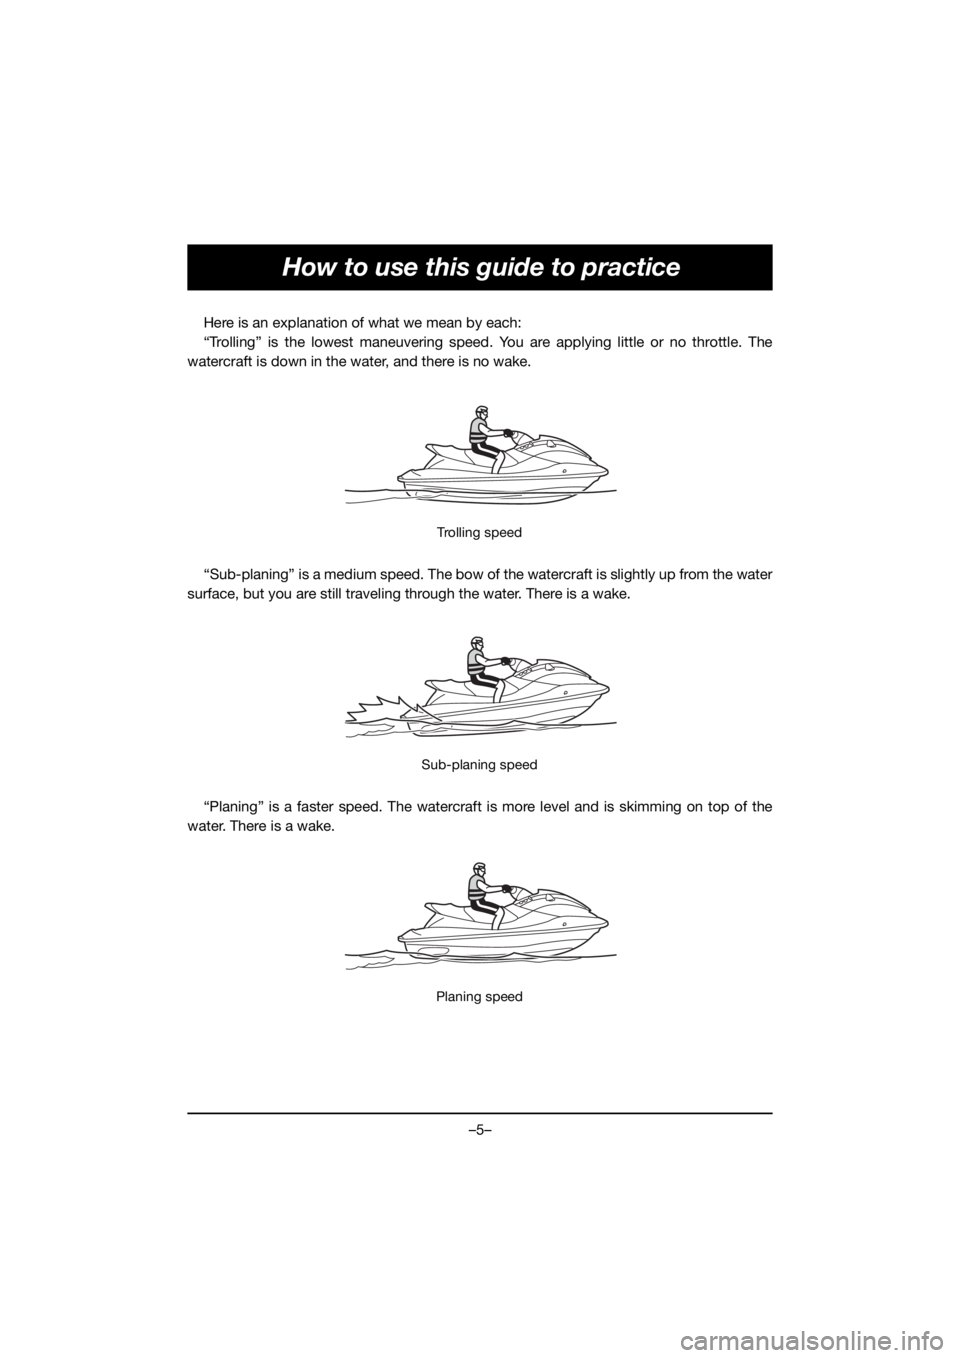 YAMAHA GP1800R SVHO 2020  Owners Manual –5–
How to use this guide to practice
Here is an explanation of what we mean by each:
“Trolling” is the lowest maneuvering speed. You are applying little or no throttle. The
watercraft is down